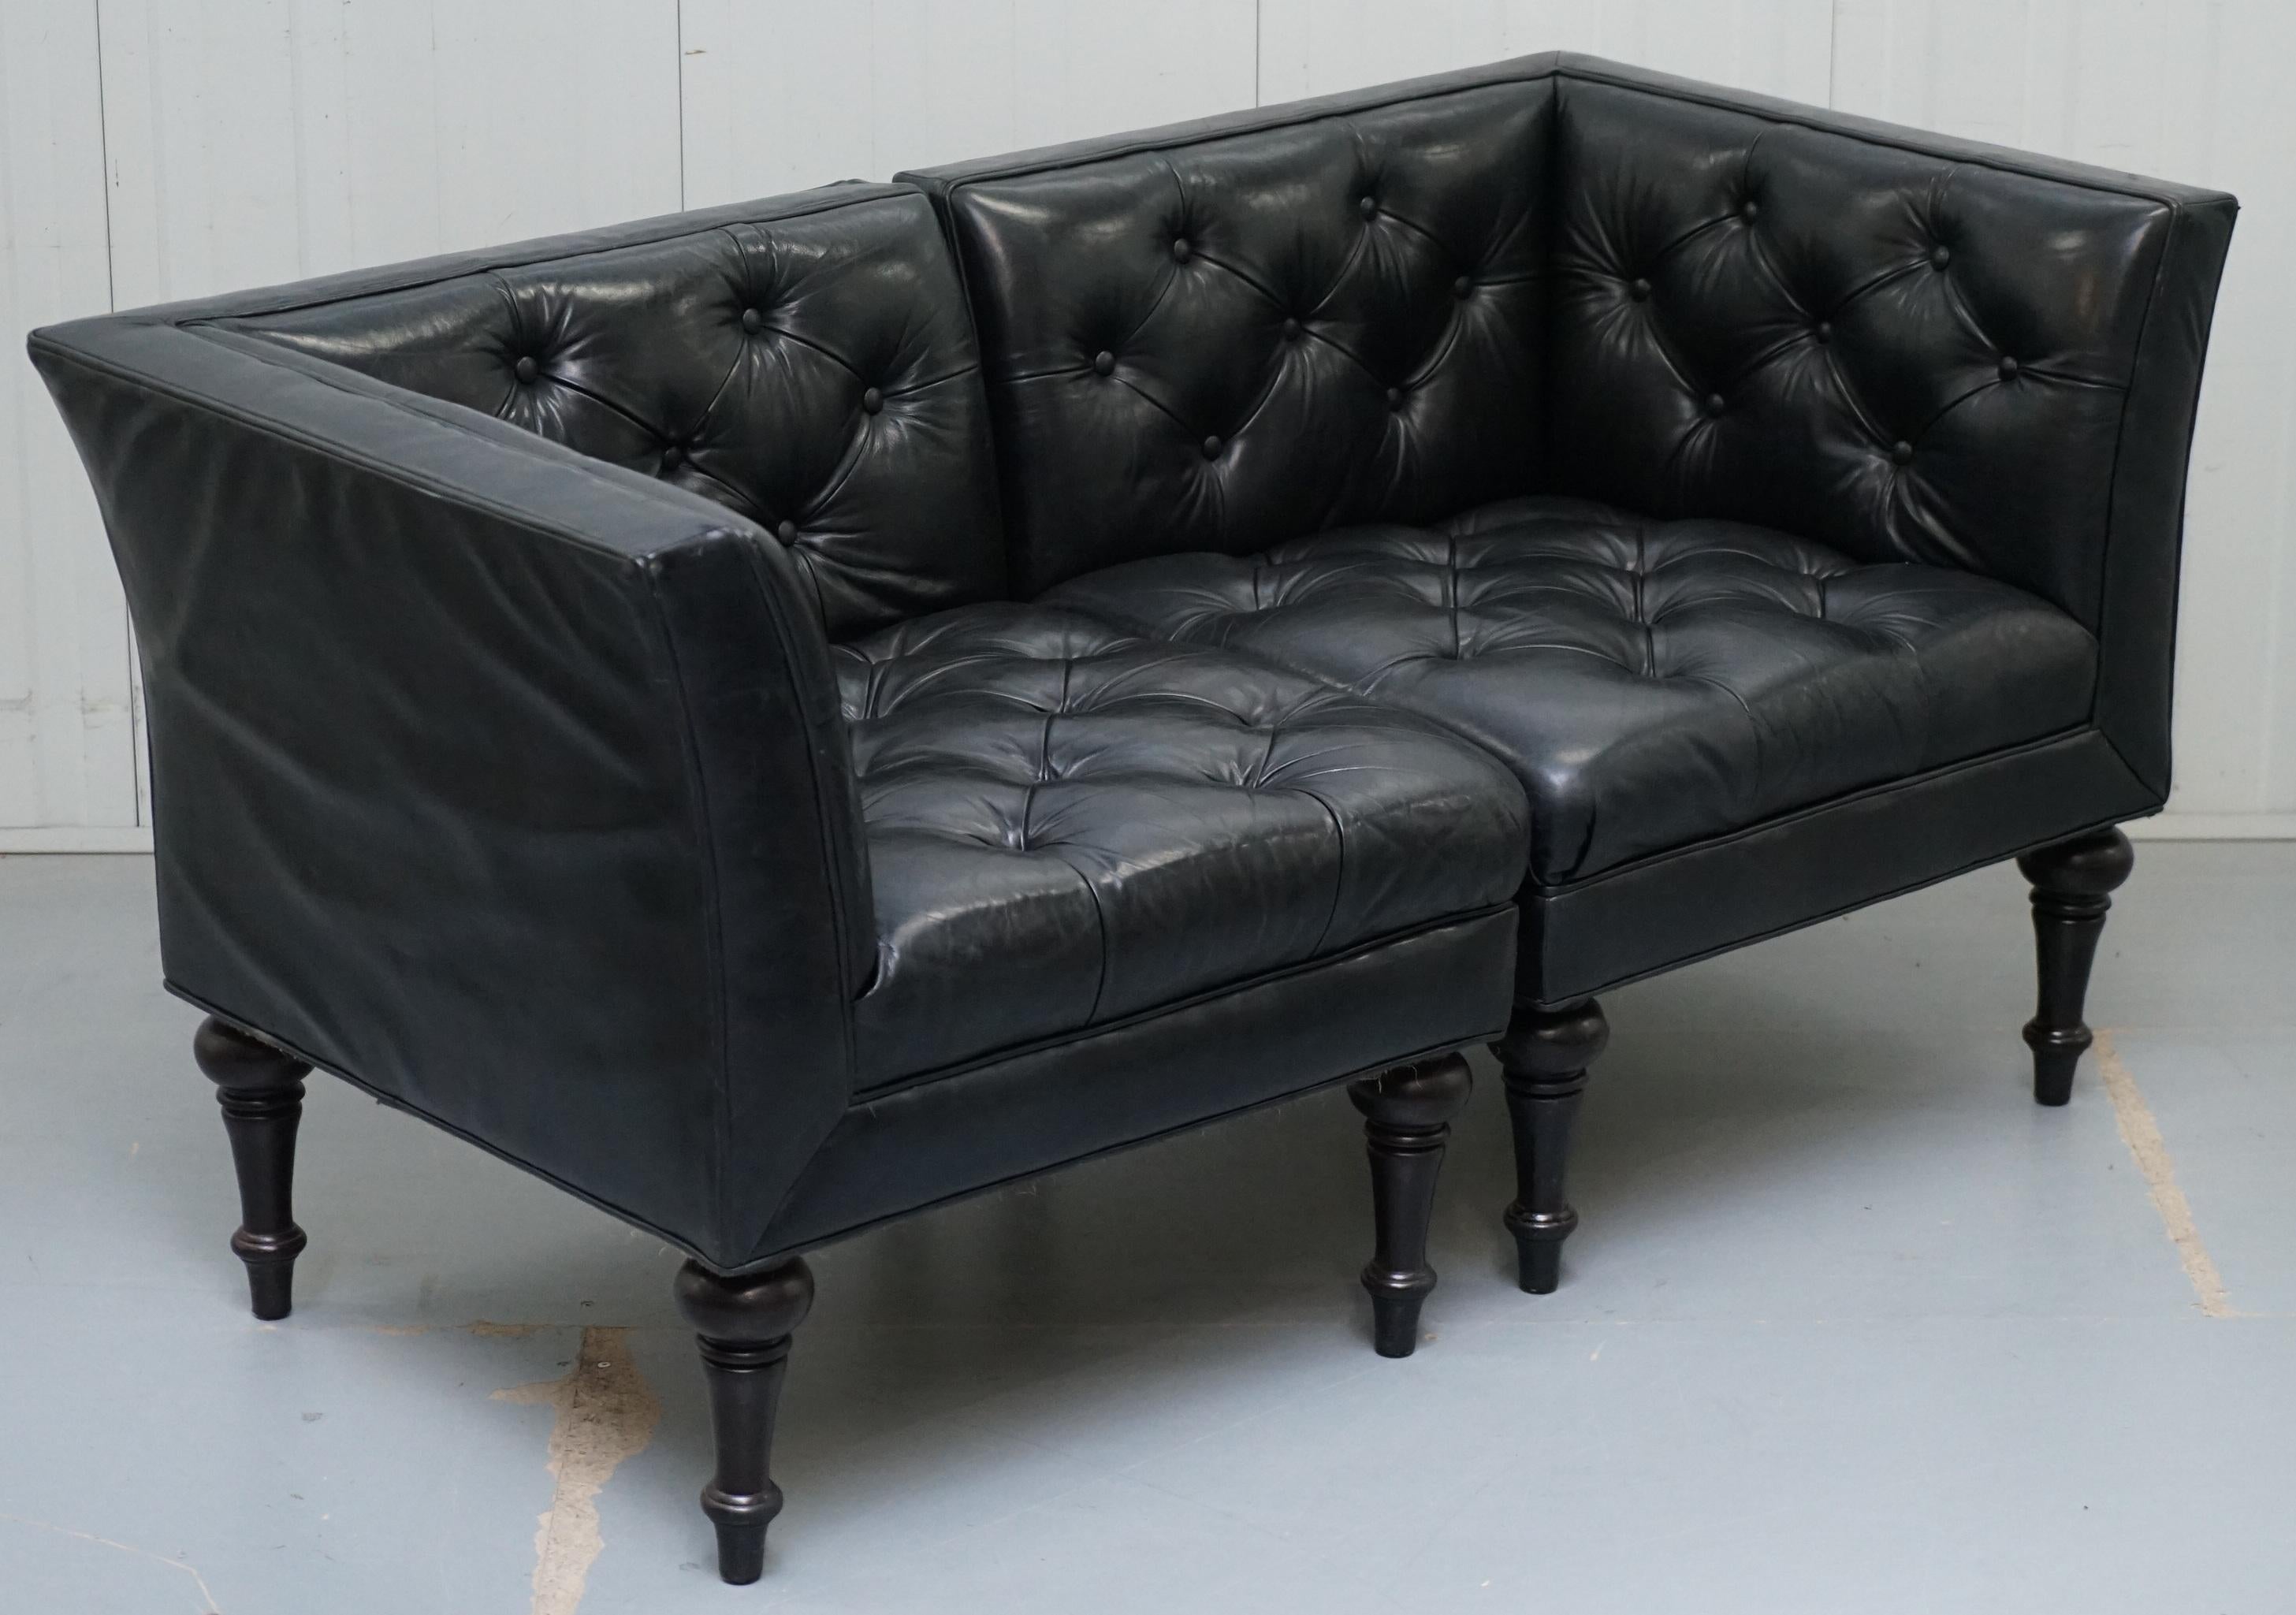 We are delighted to offer for sale this lovely pair of original Paolo Moschino jet black Chesterfield buttoned corner chairs RRP £6200 designed for Nicholas Haslan London

The price of £2650 per chair excludes the upholstery work, all in they are